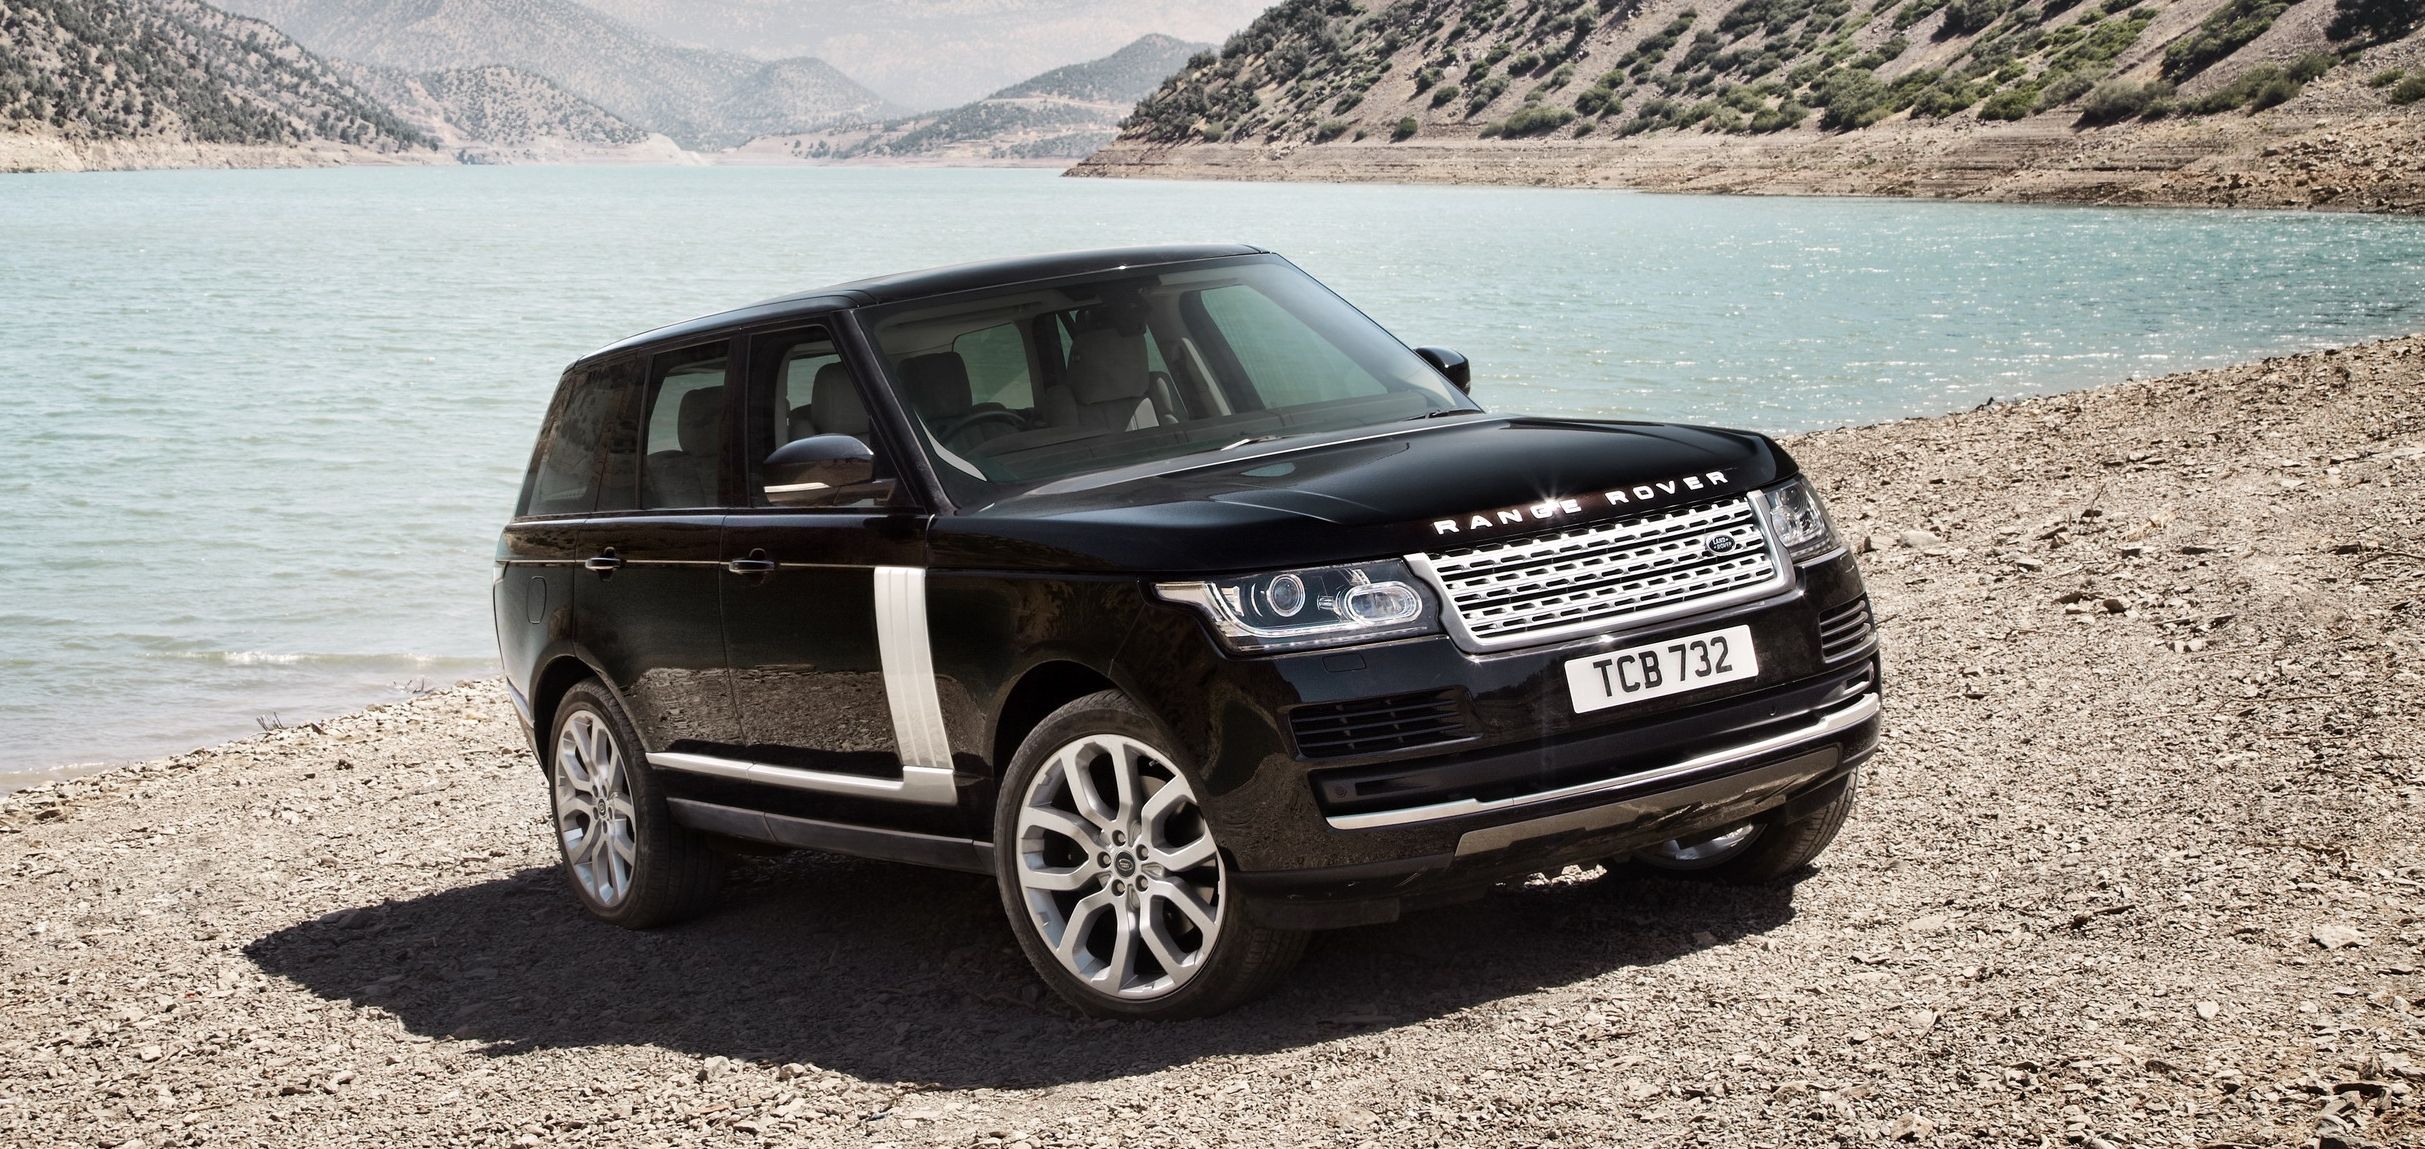  Will Range Rover actually build a Tesla Model X competitor? Let us know your thoughs. 